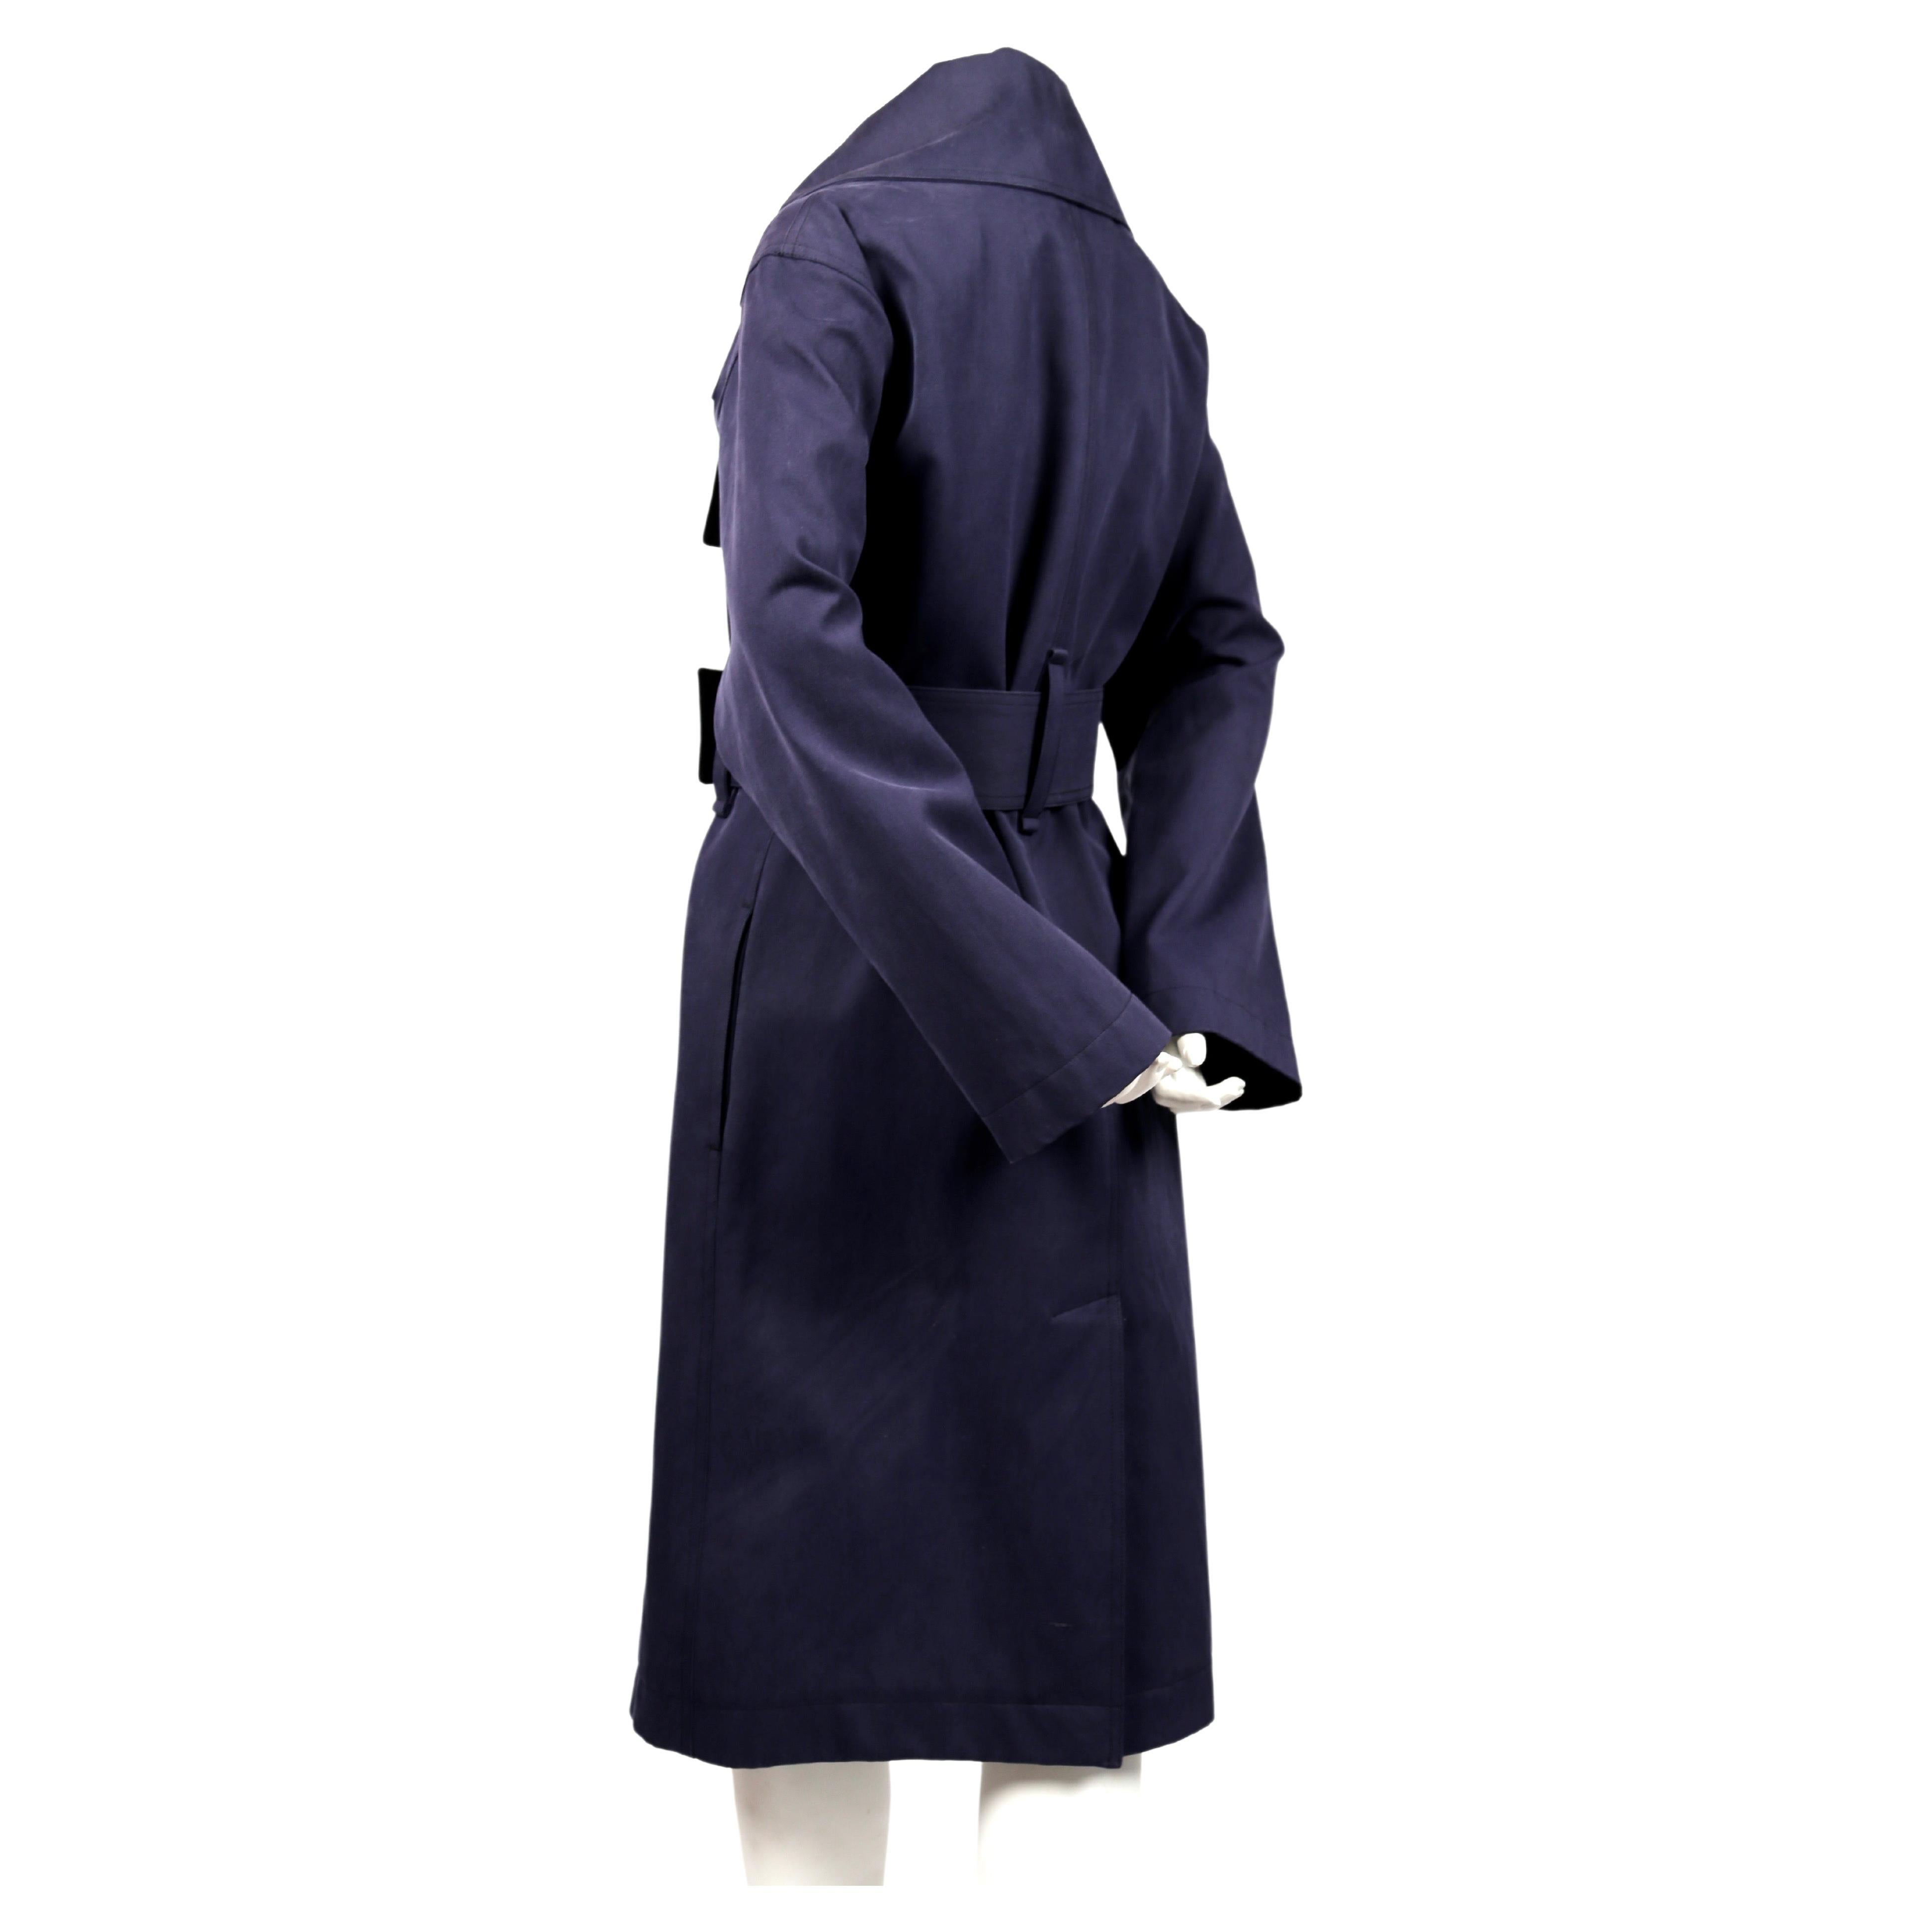 CELINE by PHOEBE PHILO navy blue brushed cotton trench coat For Sale 1